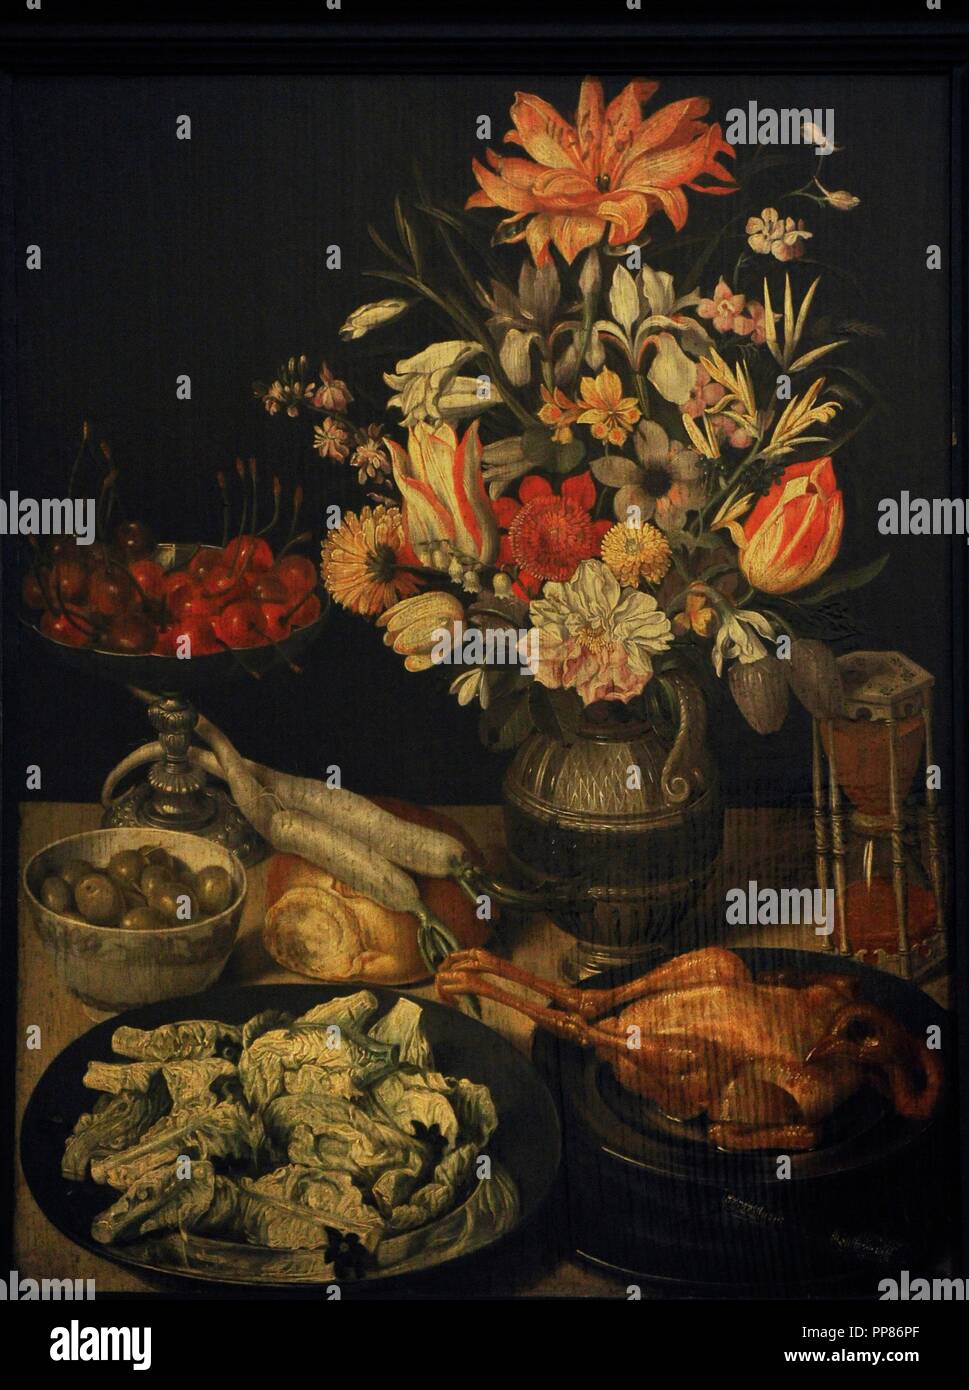 Georg Flegel (1566-1638). German painter. Still Life with Flowers and Snacks, 1630-1635. Oil on panel. The State Hermitage Museum. Saint Petersburg. Russia. Stock Photo